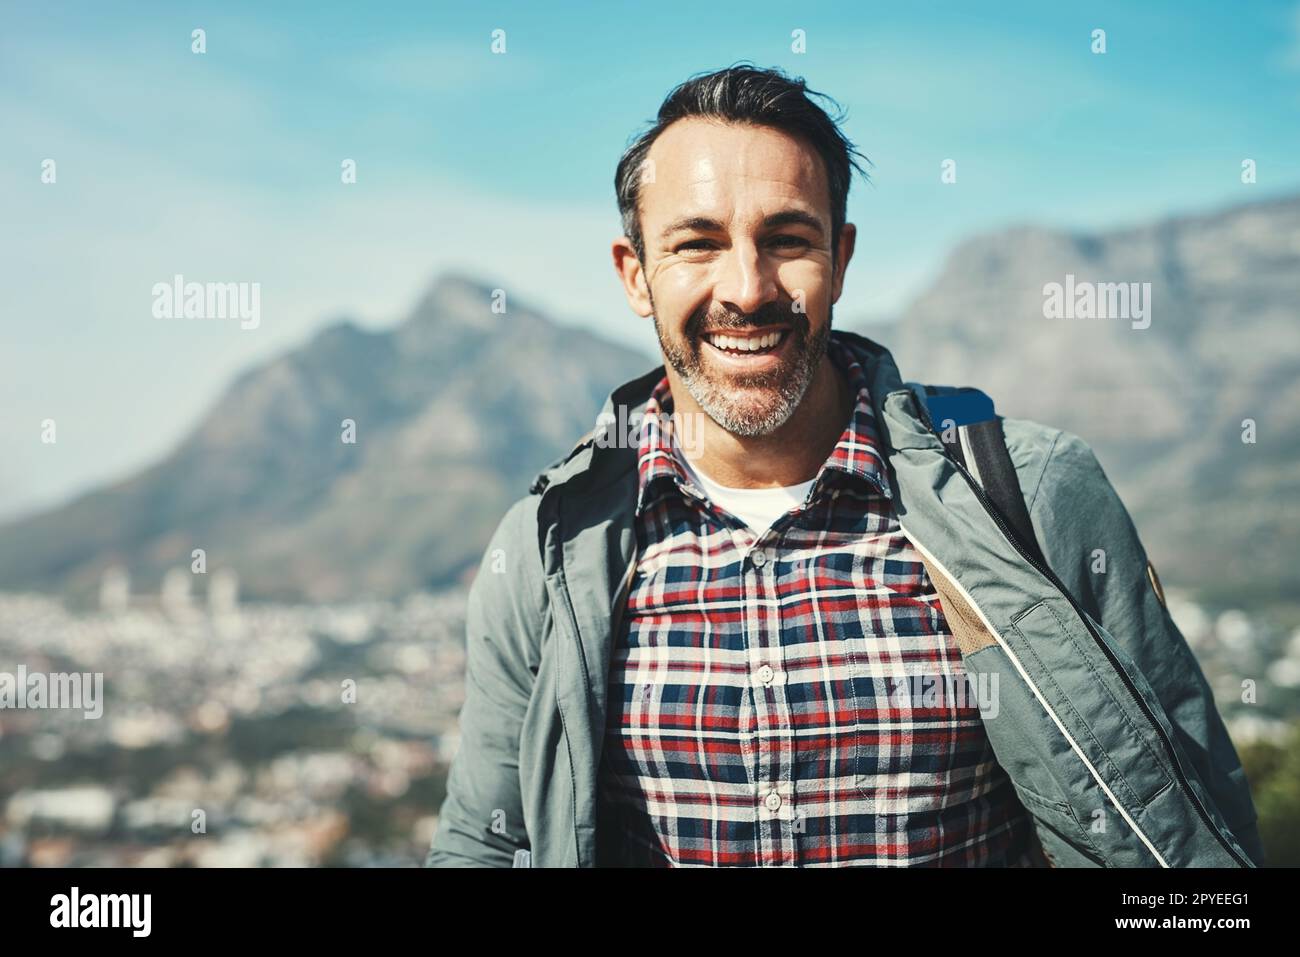 Happy days have finally arrived. Portrait of a middle aged man smiling in front of a mountain landscape. Stock Photo